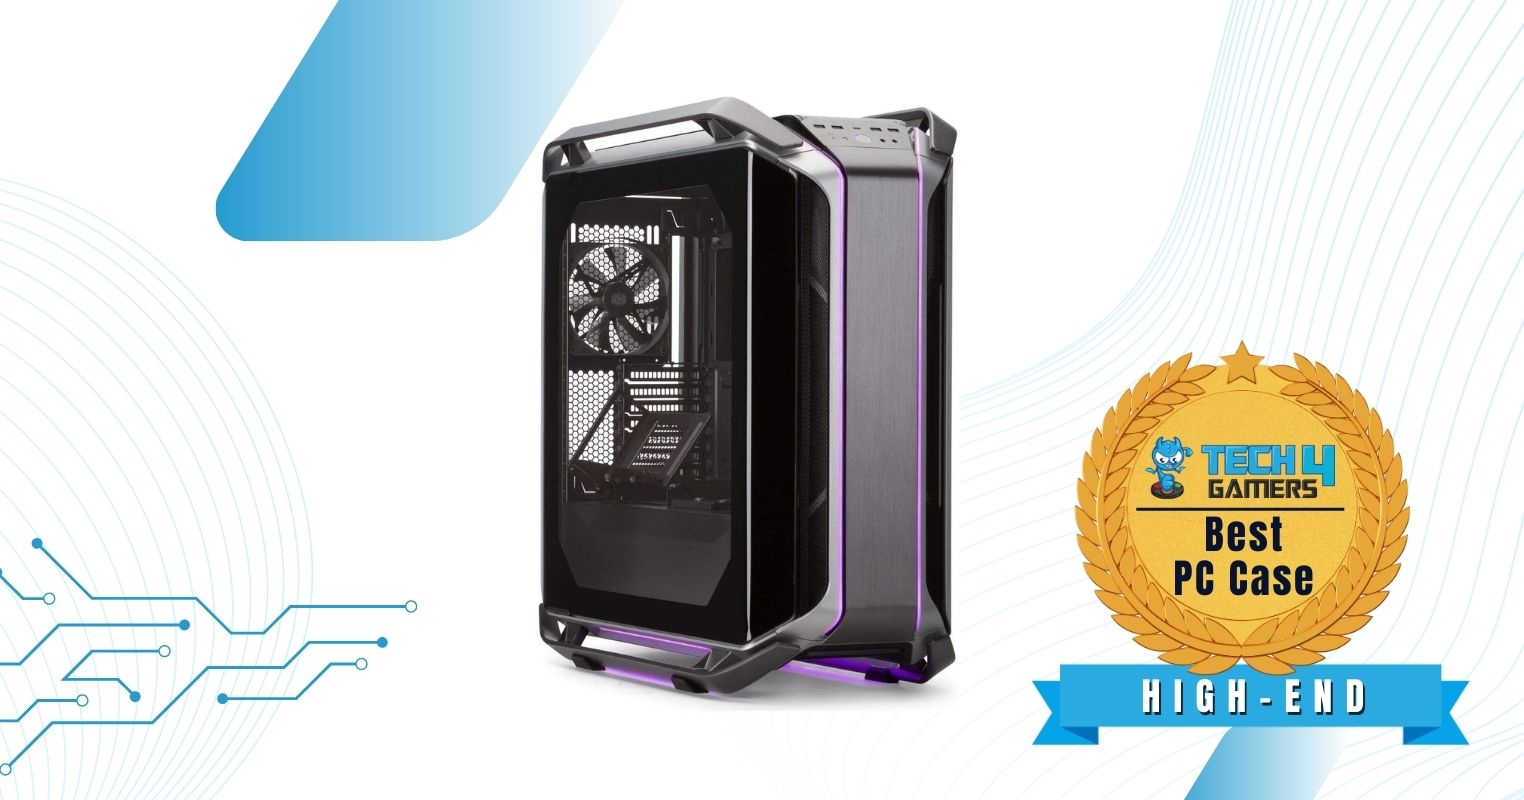 Cooler Master Cosmos C700M - Best High-End PC Case